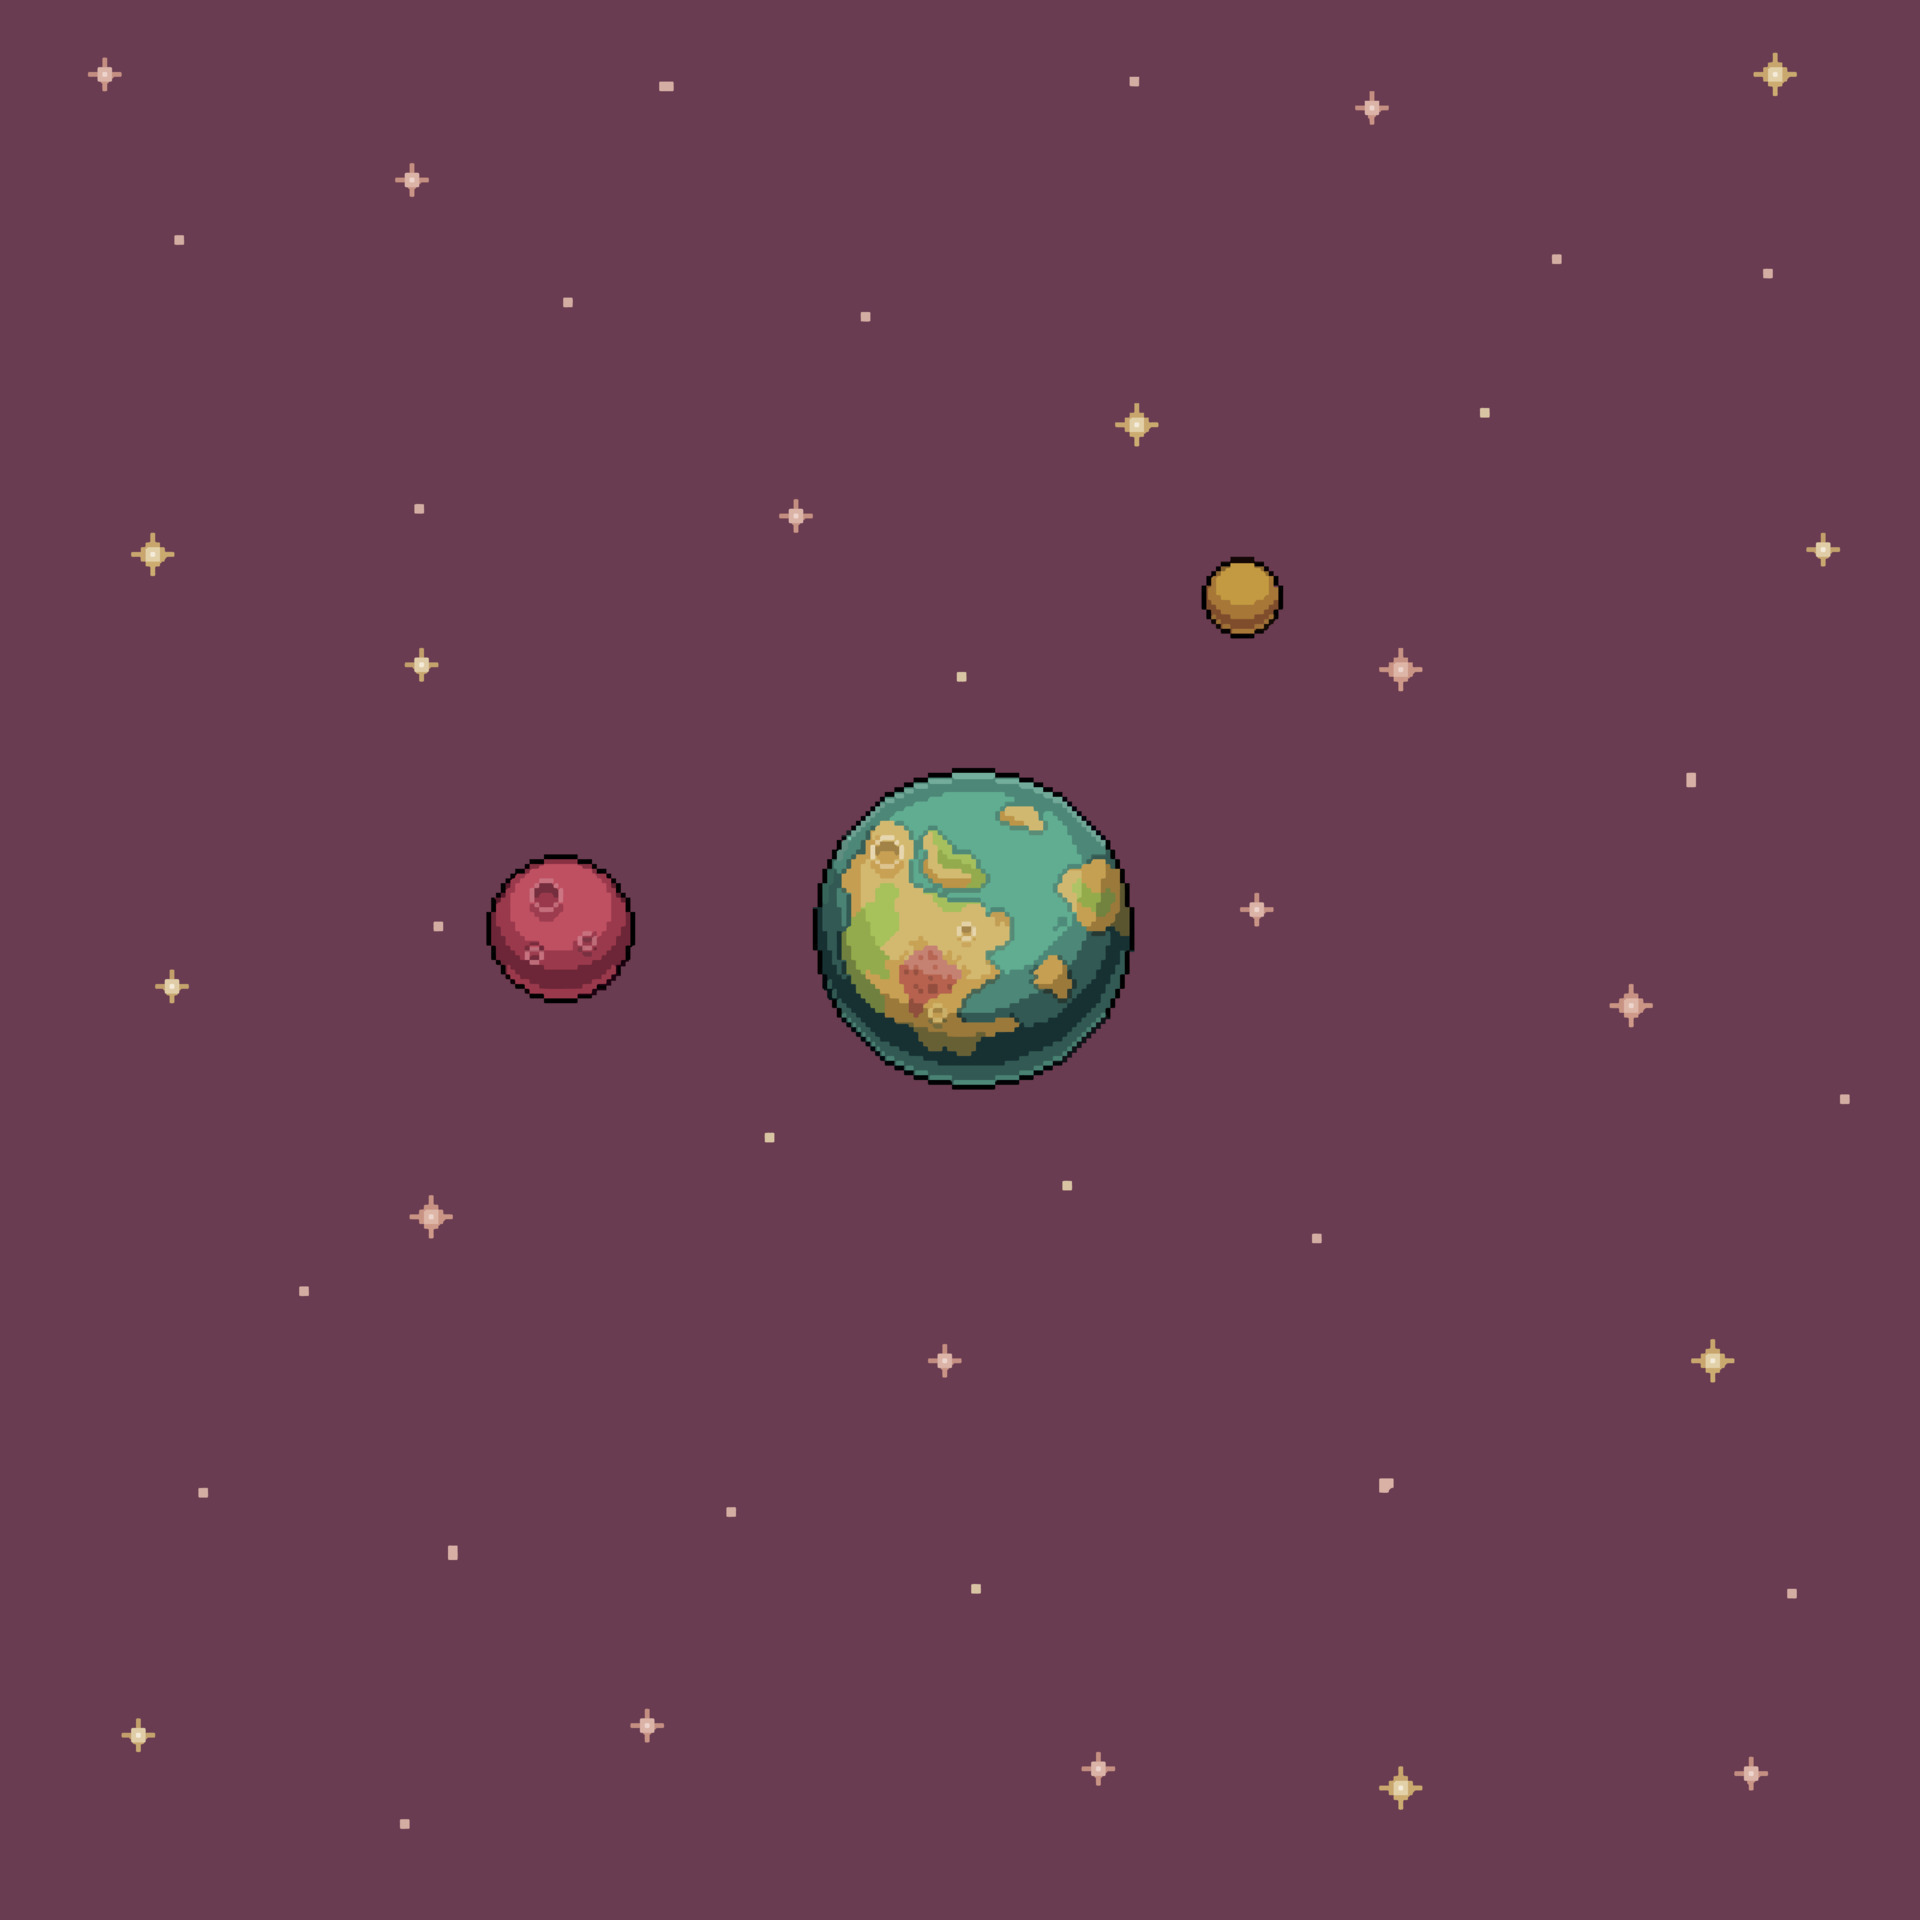 Pixel art wallpaper planet and stars in space. 8bit game background